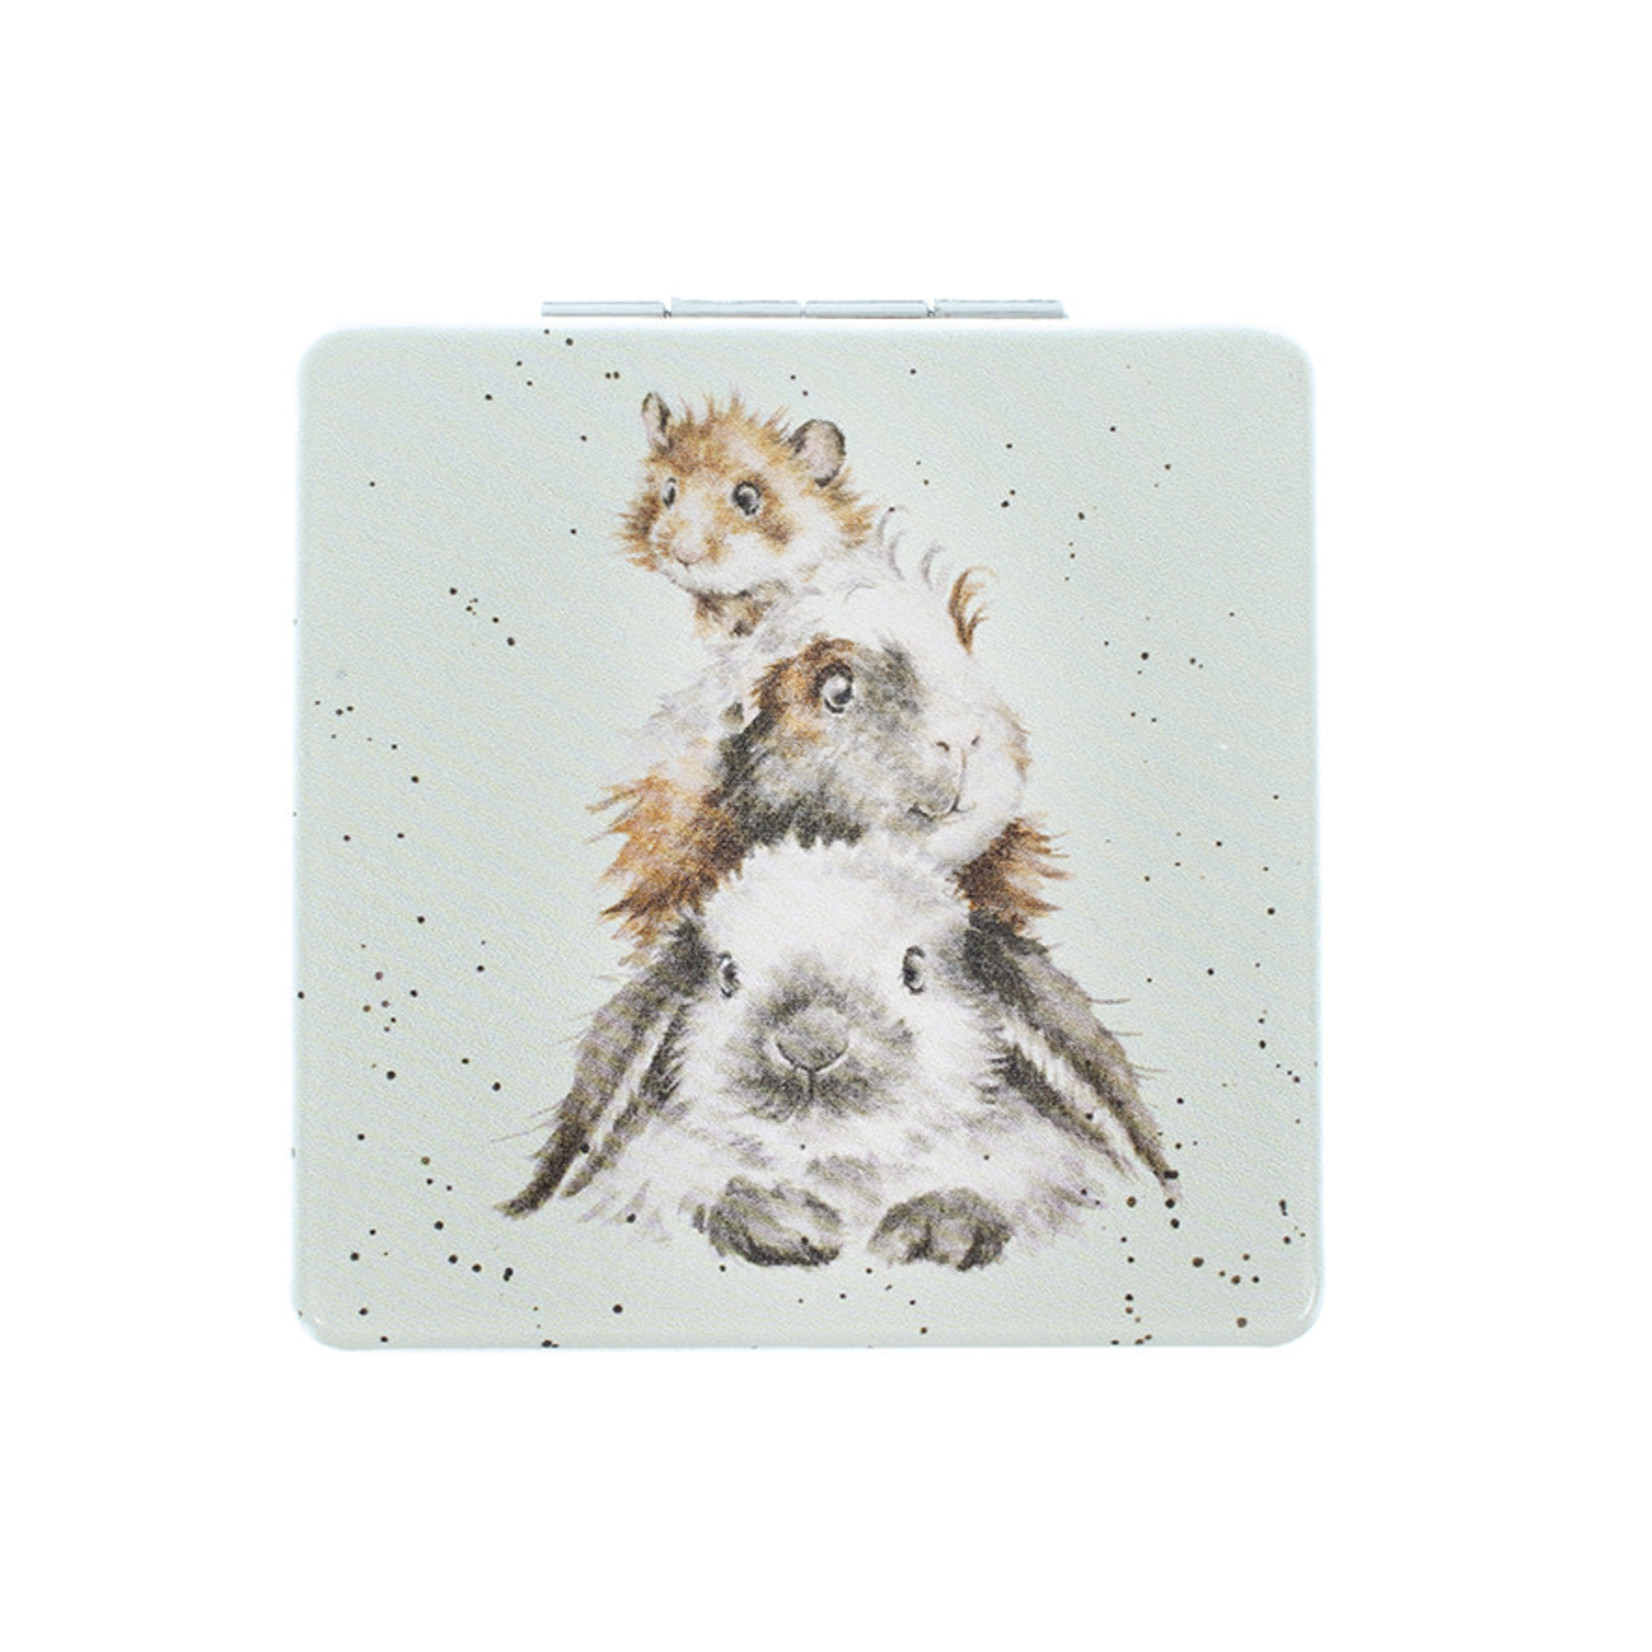 Wrendale Designs MR001 Compact Mirror - 'Piggy In The Middle' Rabbit, Guinea Pig & Hamster